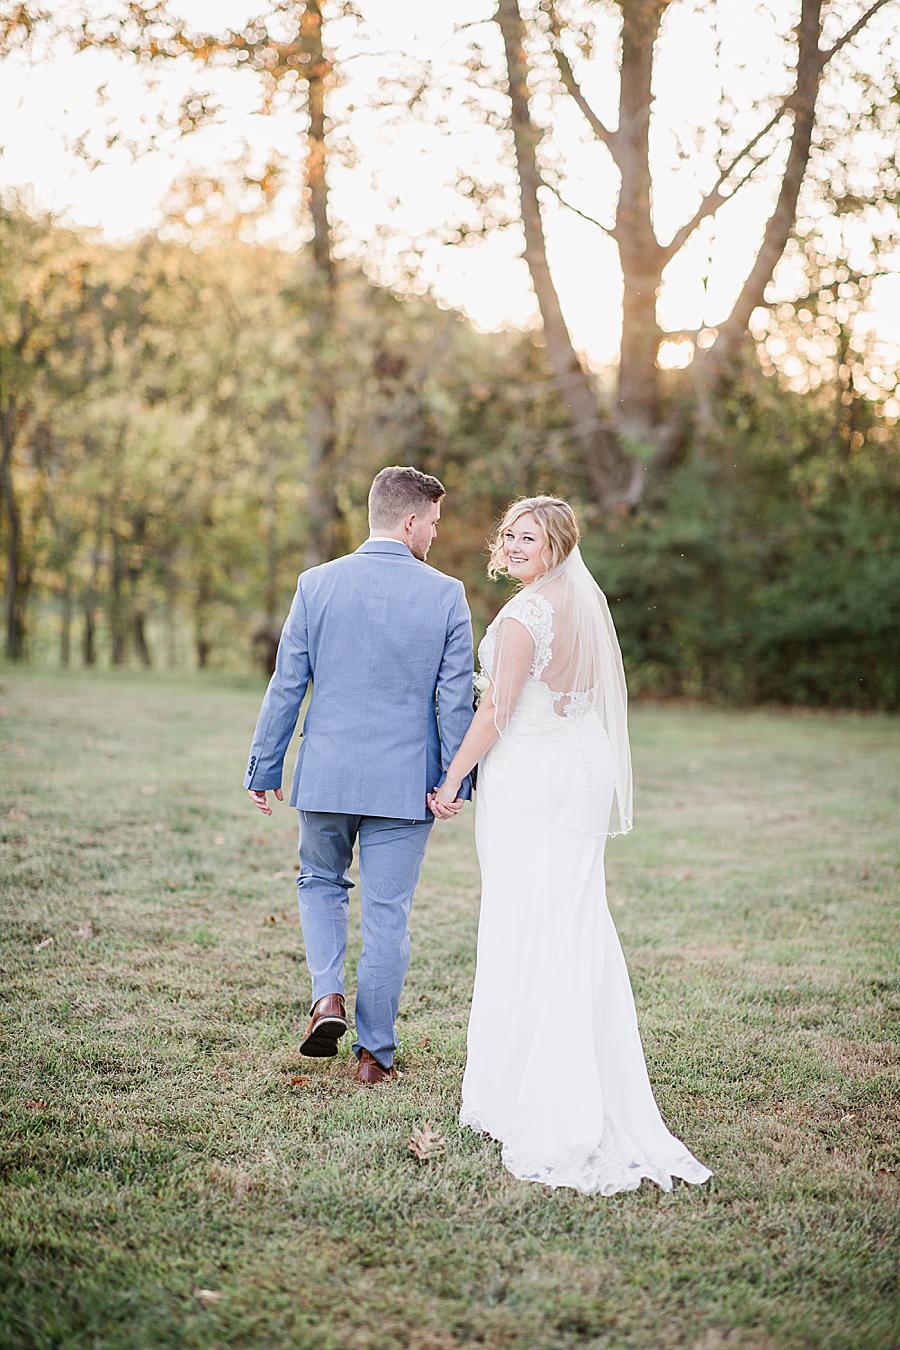 Strolling by Knoxville Wedding Photographer, Amanda May Photos.